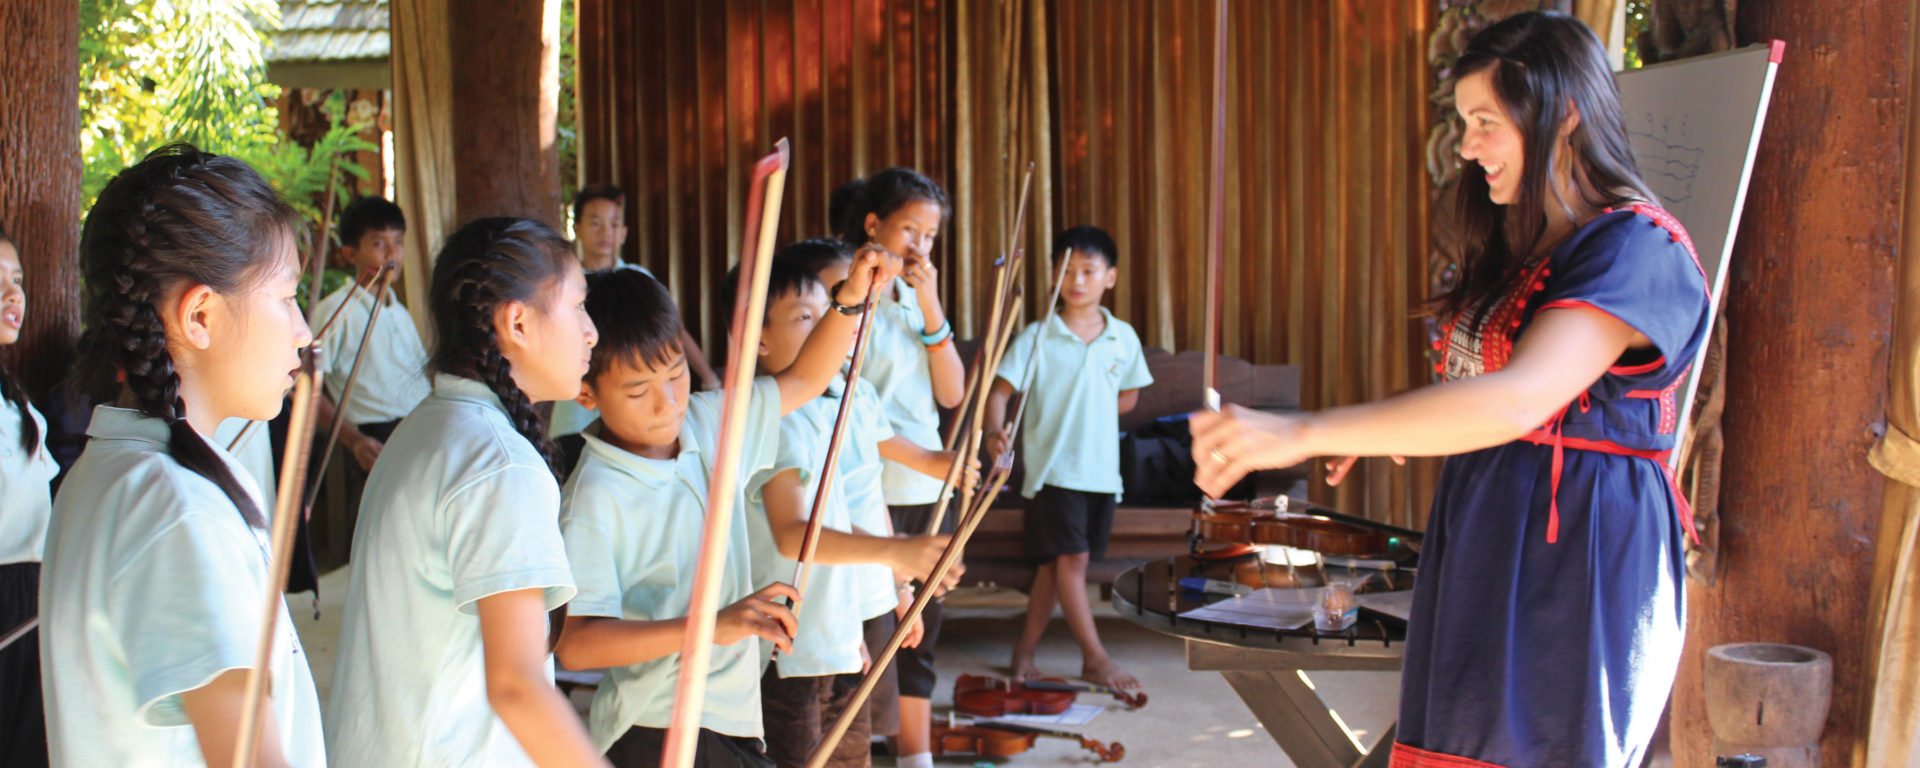 Angela Ammerman teaches Thai children the proper way to hold the violin bow.